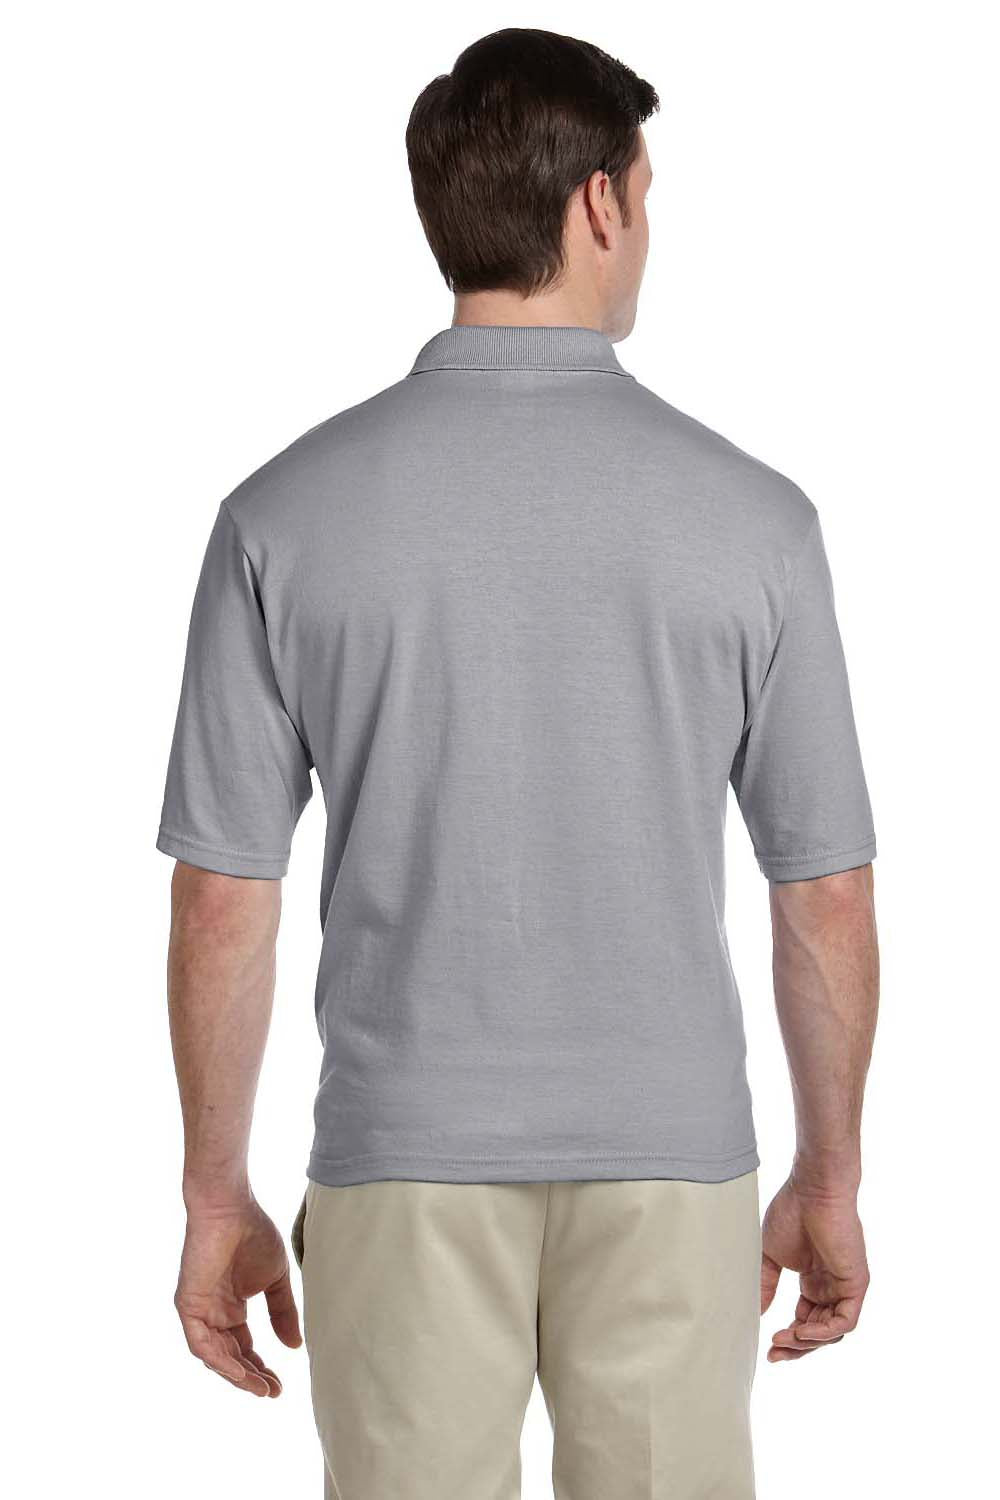 Jerzees 436P Mens SpotShield Stain Resistant Short Sleeve Polo Shirt w/ Pocket Oxford Grey Back